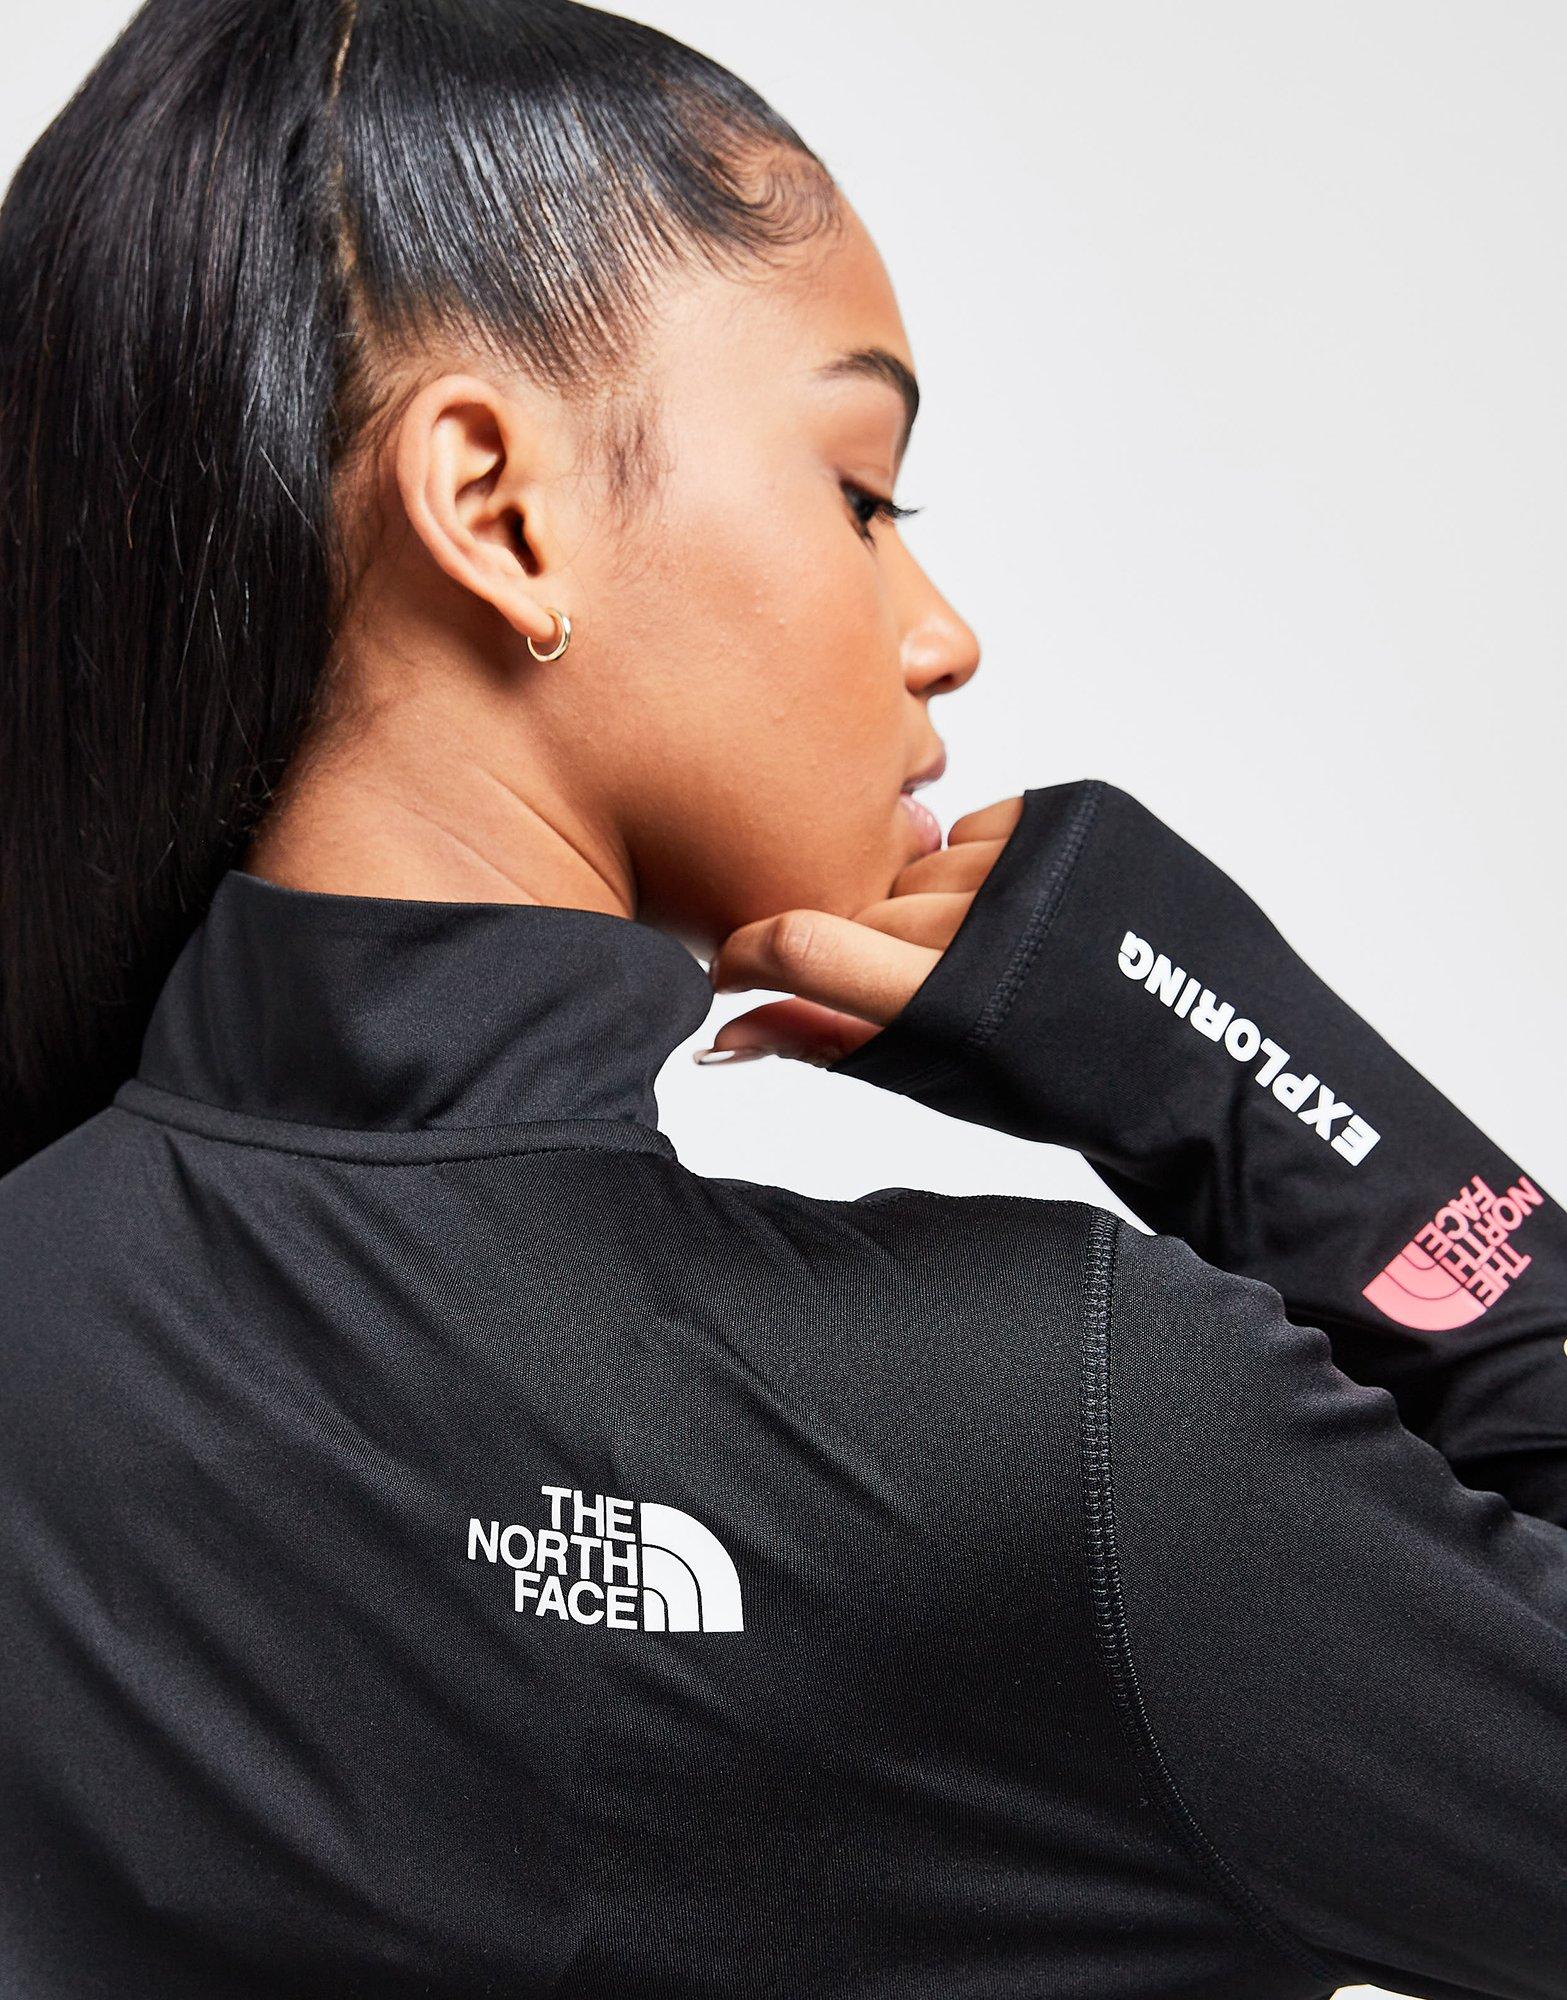 Black The North Face Never Stop Exploring 1/4 Zip Top | JD Sports 